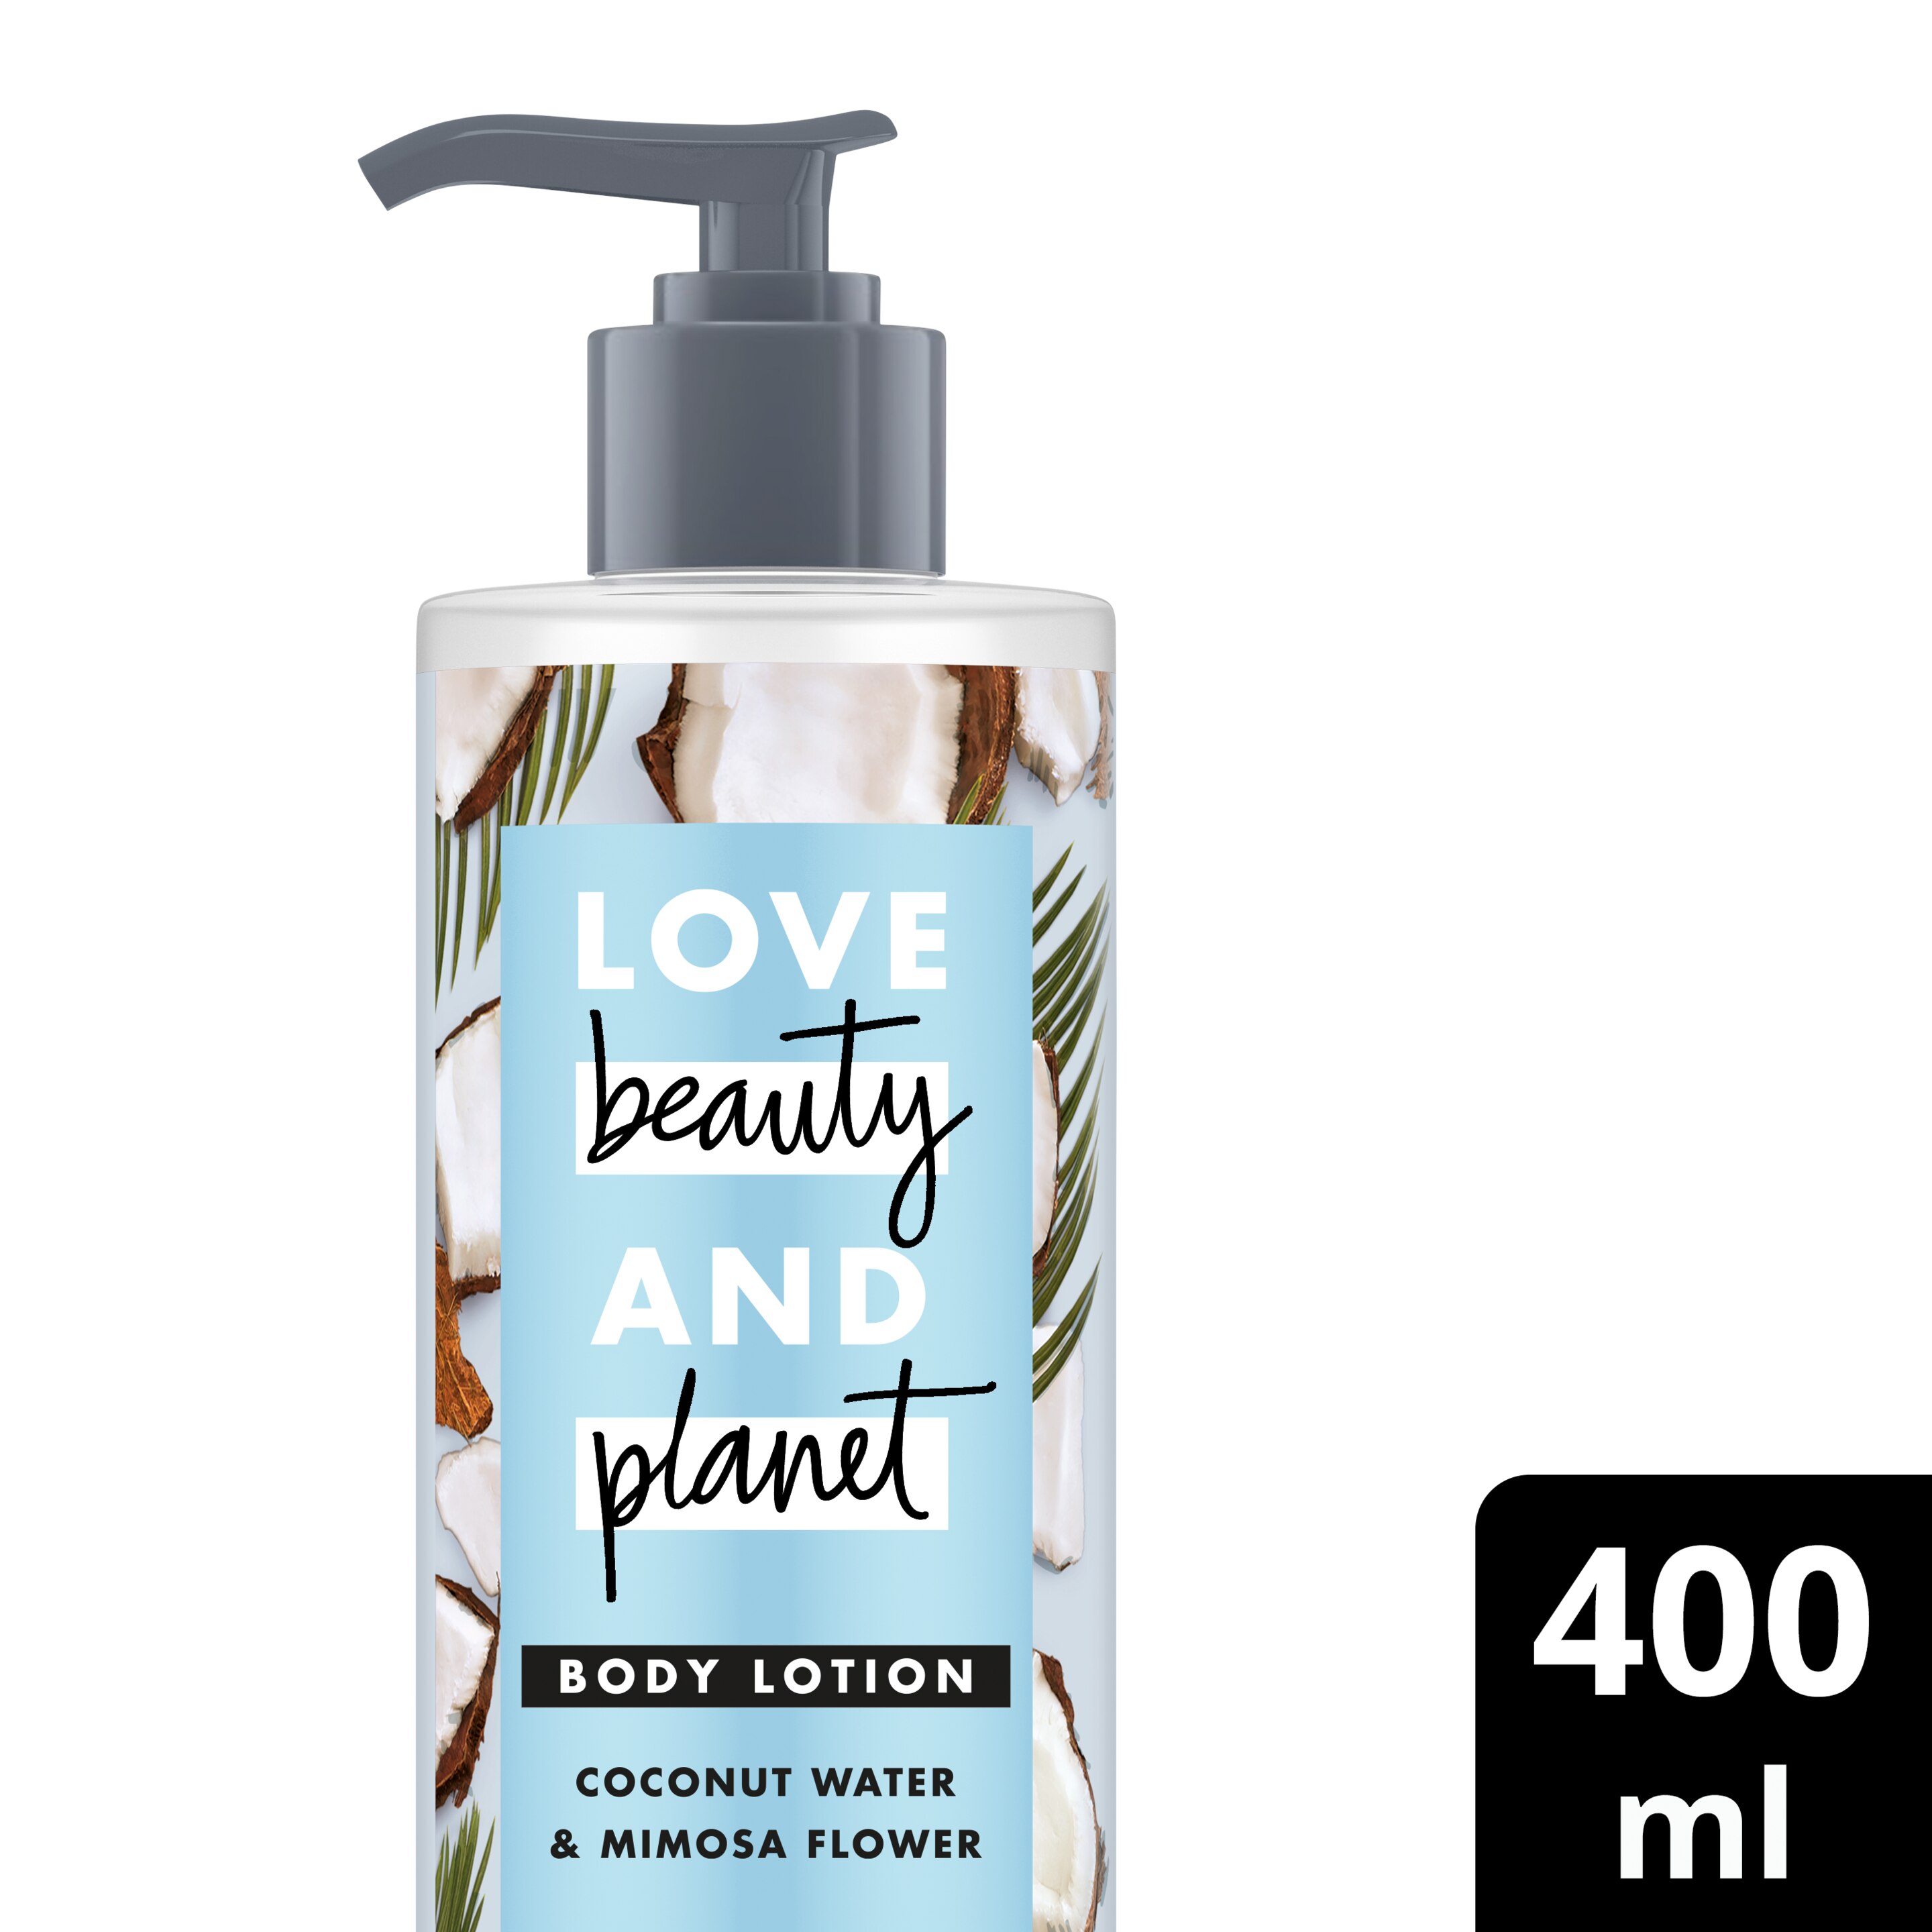 coconut water & mimosa flower body lotion Text